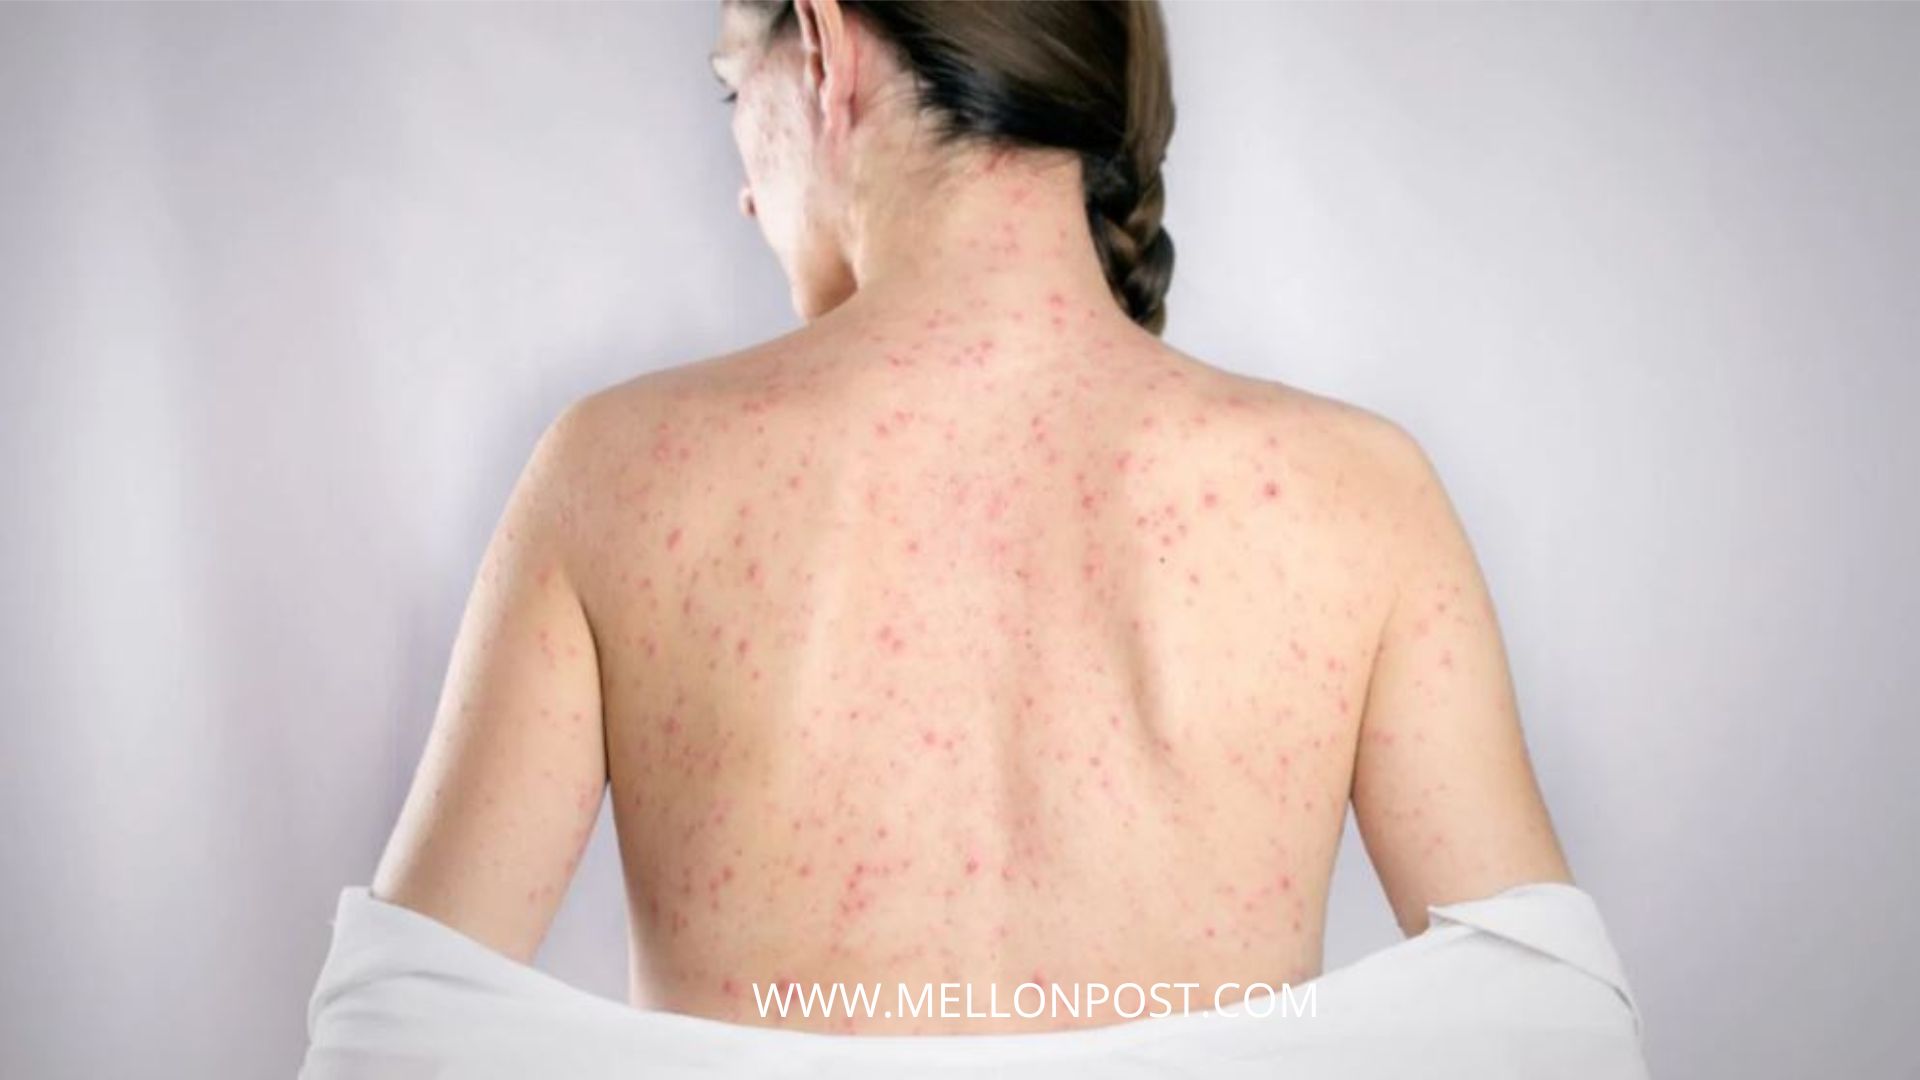 Popular Causes of Measles Symptoms, Complications and Treatment